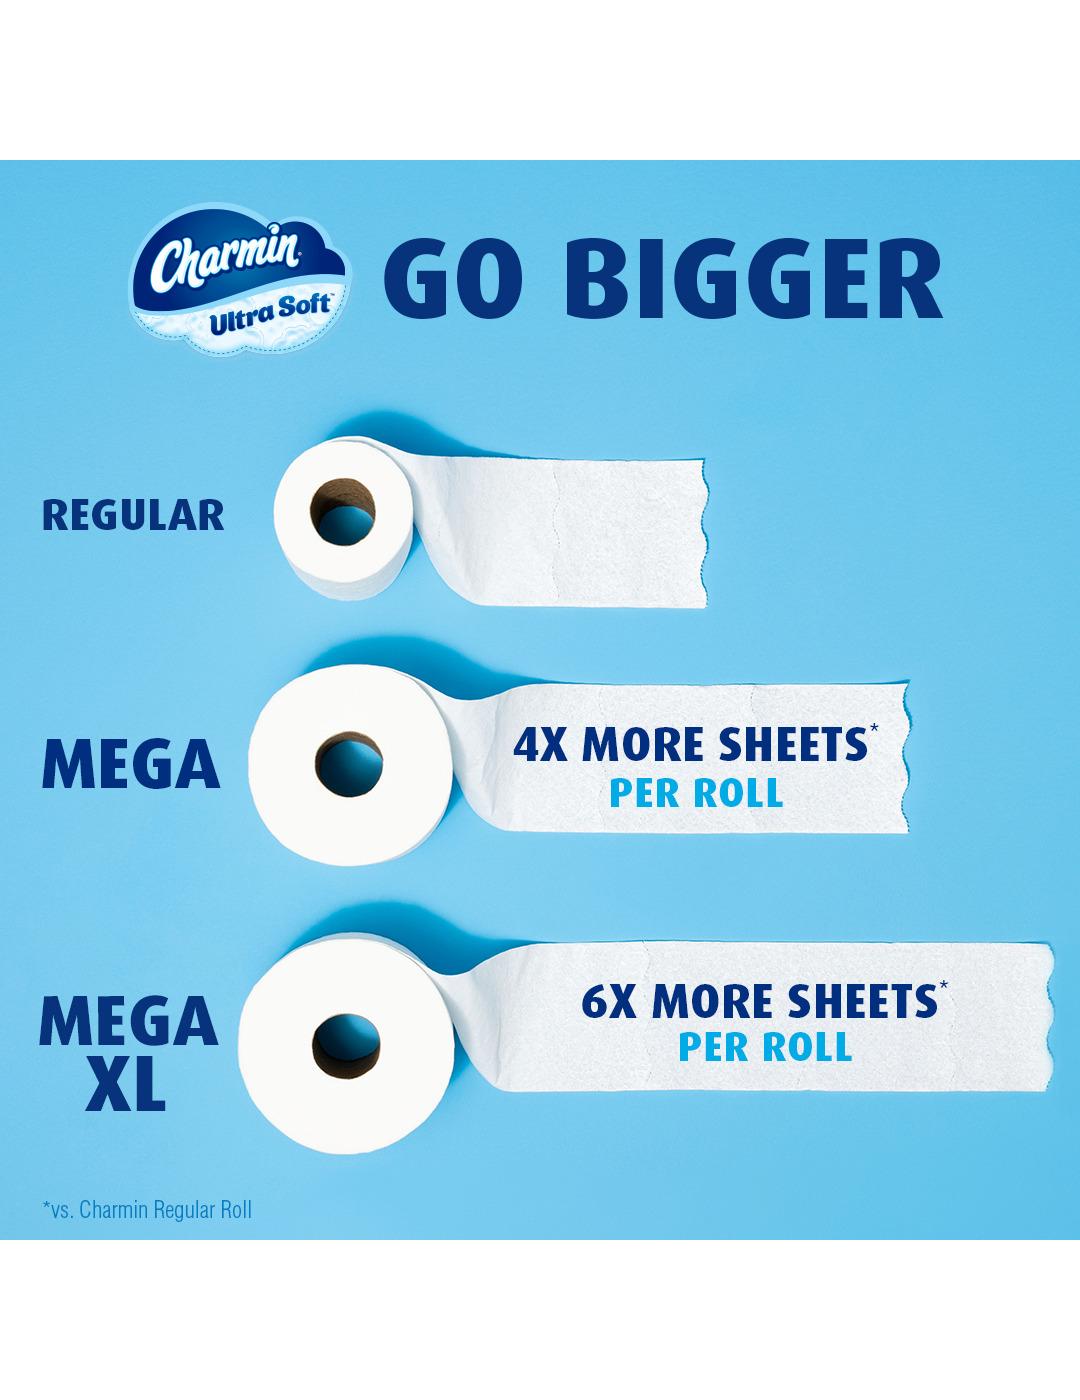 Charmin Ultra Soft Toilet Paper; image 7 of 20